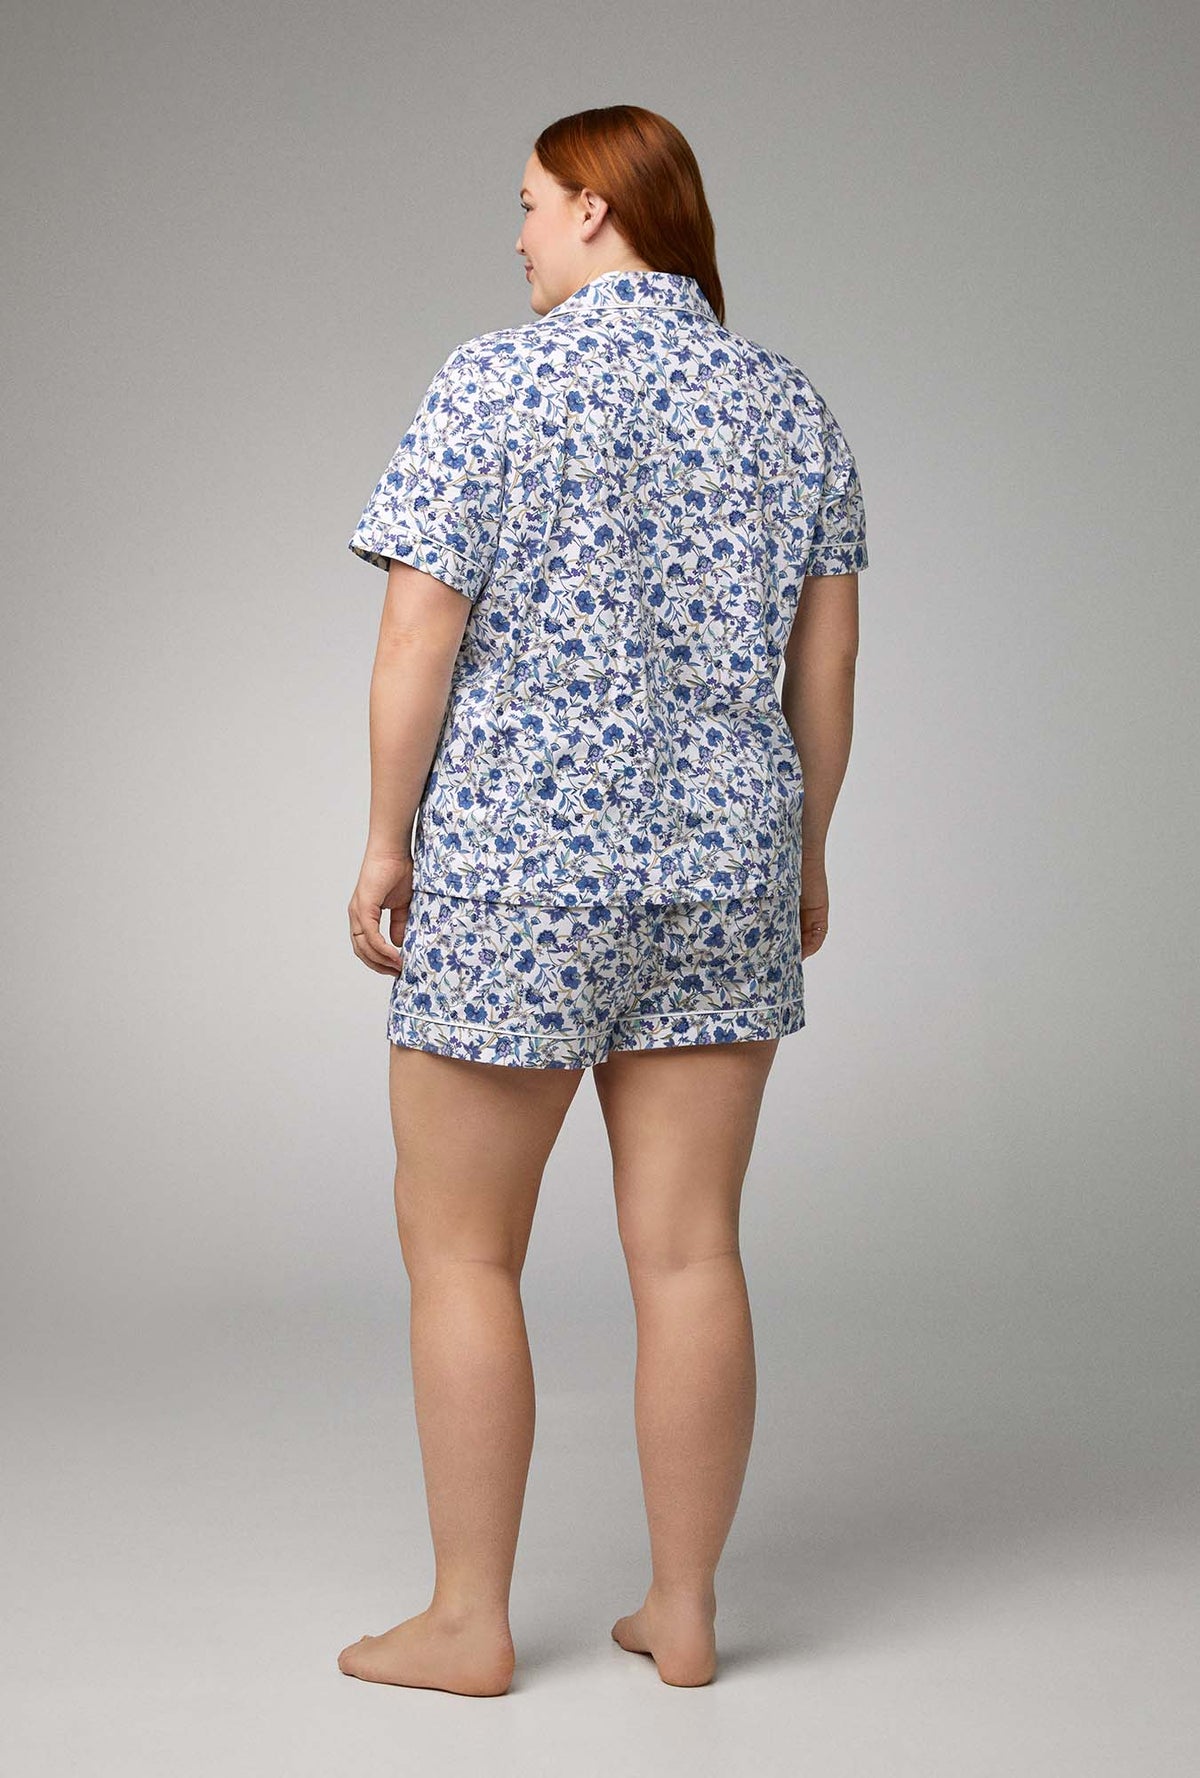 A lady wearing Short Sleeve Classic Shorty Stretch Jersey PJ Set with Terrance Floral print